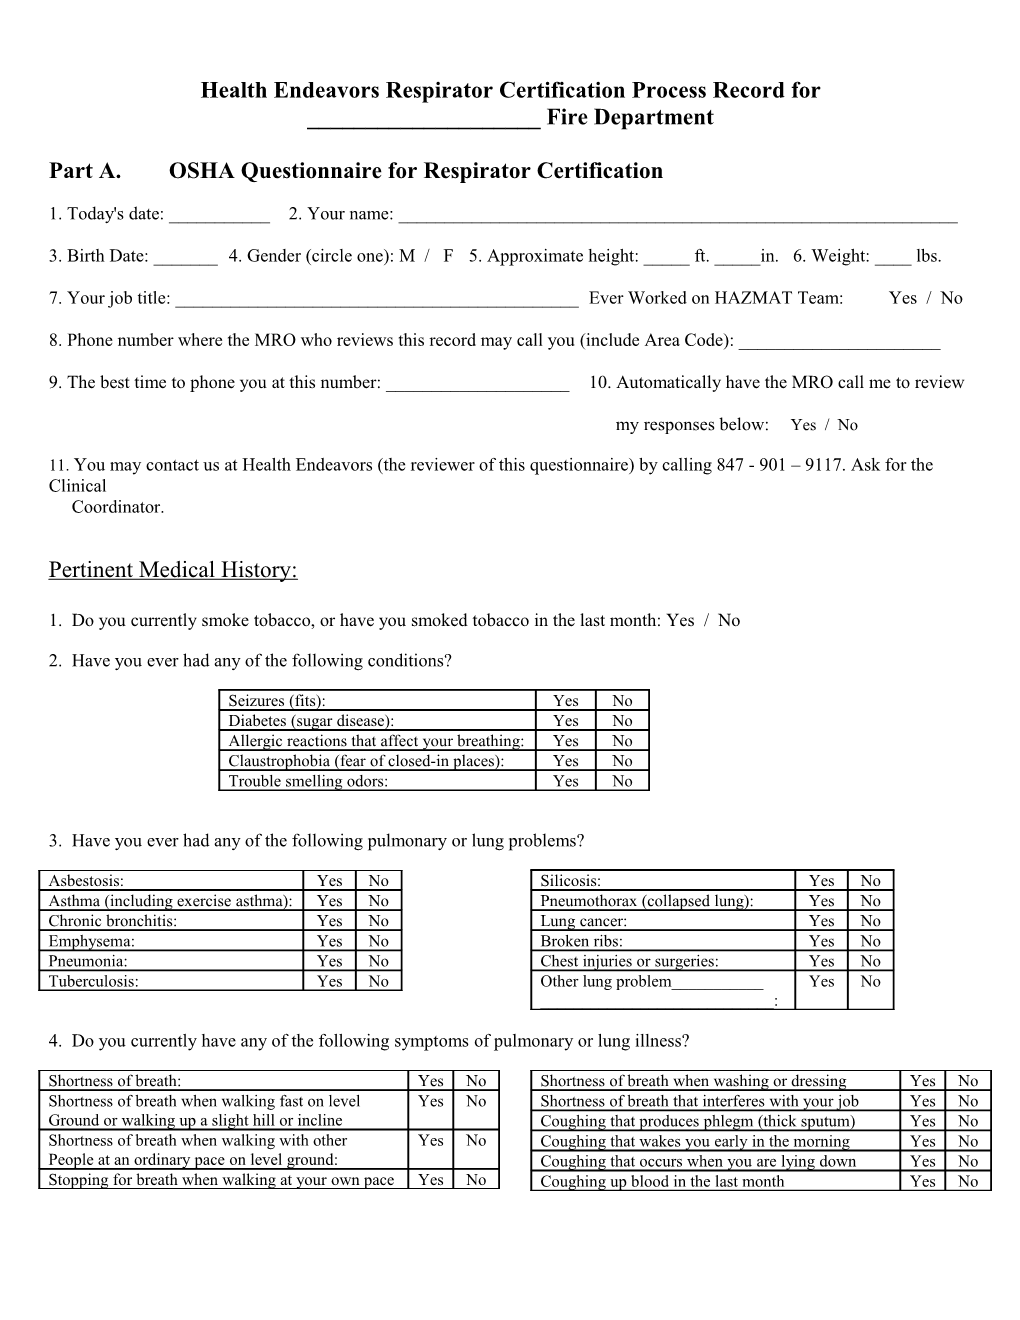 Health Endeavors Respirator Certification Process Record For